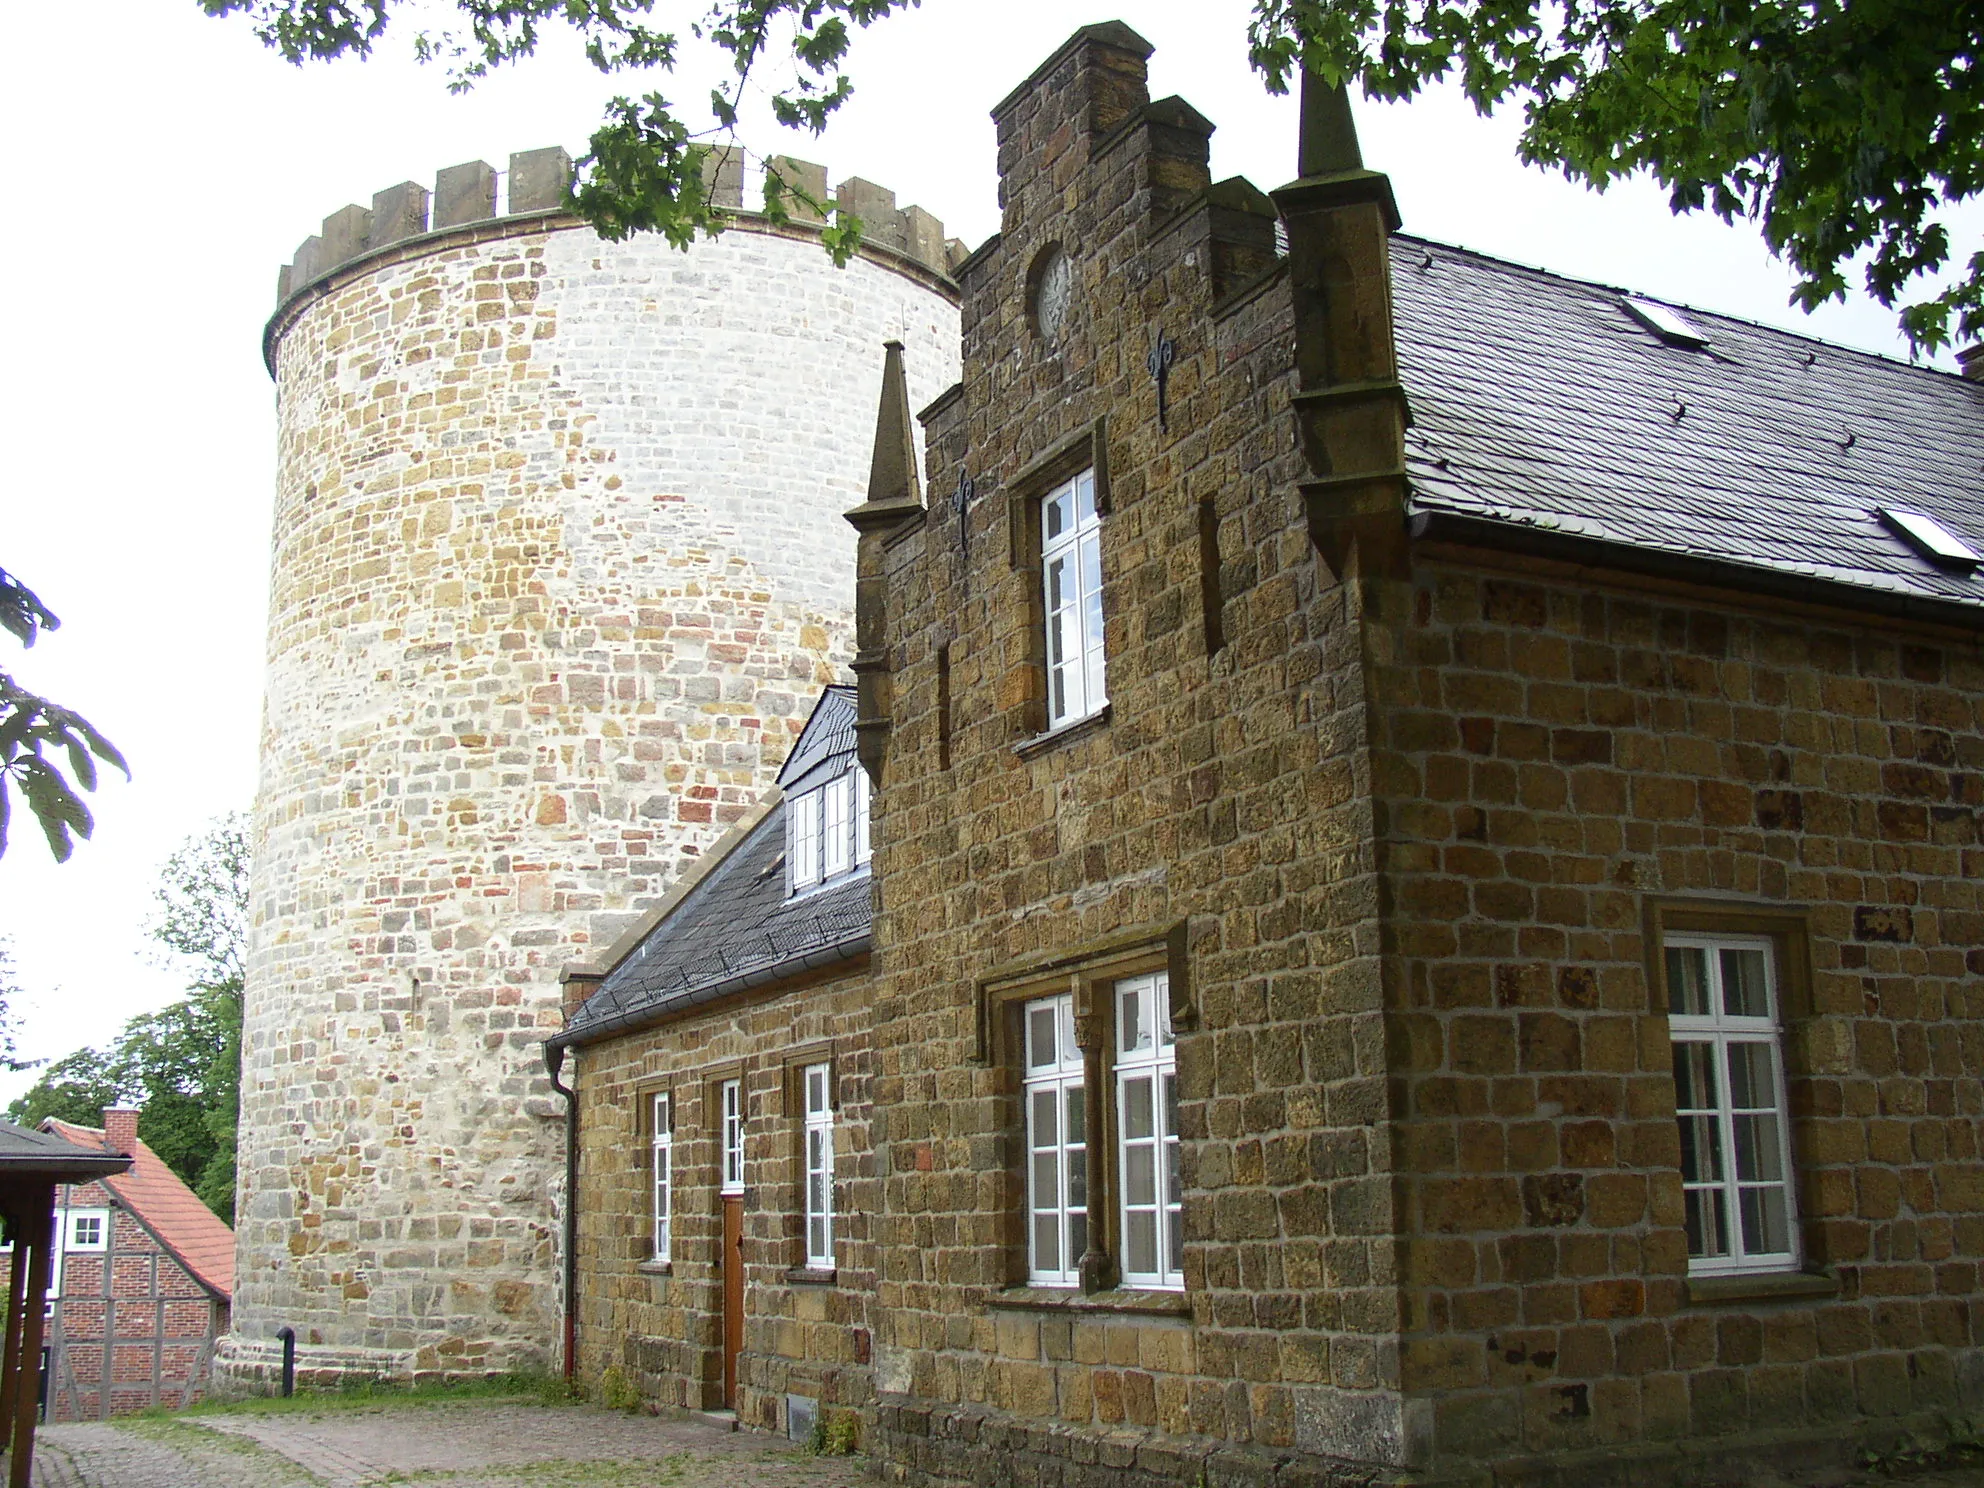 Photo showing: stronghold Ravensberg, fortified tower and forester's lodge, Borgholzhausen, county of Gütersloh, Germany